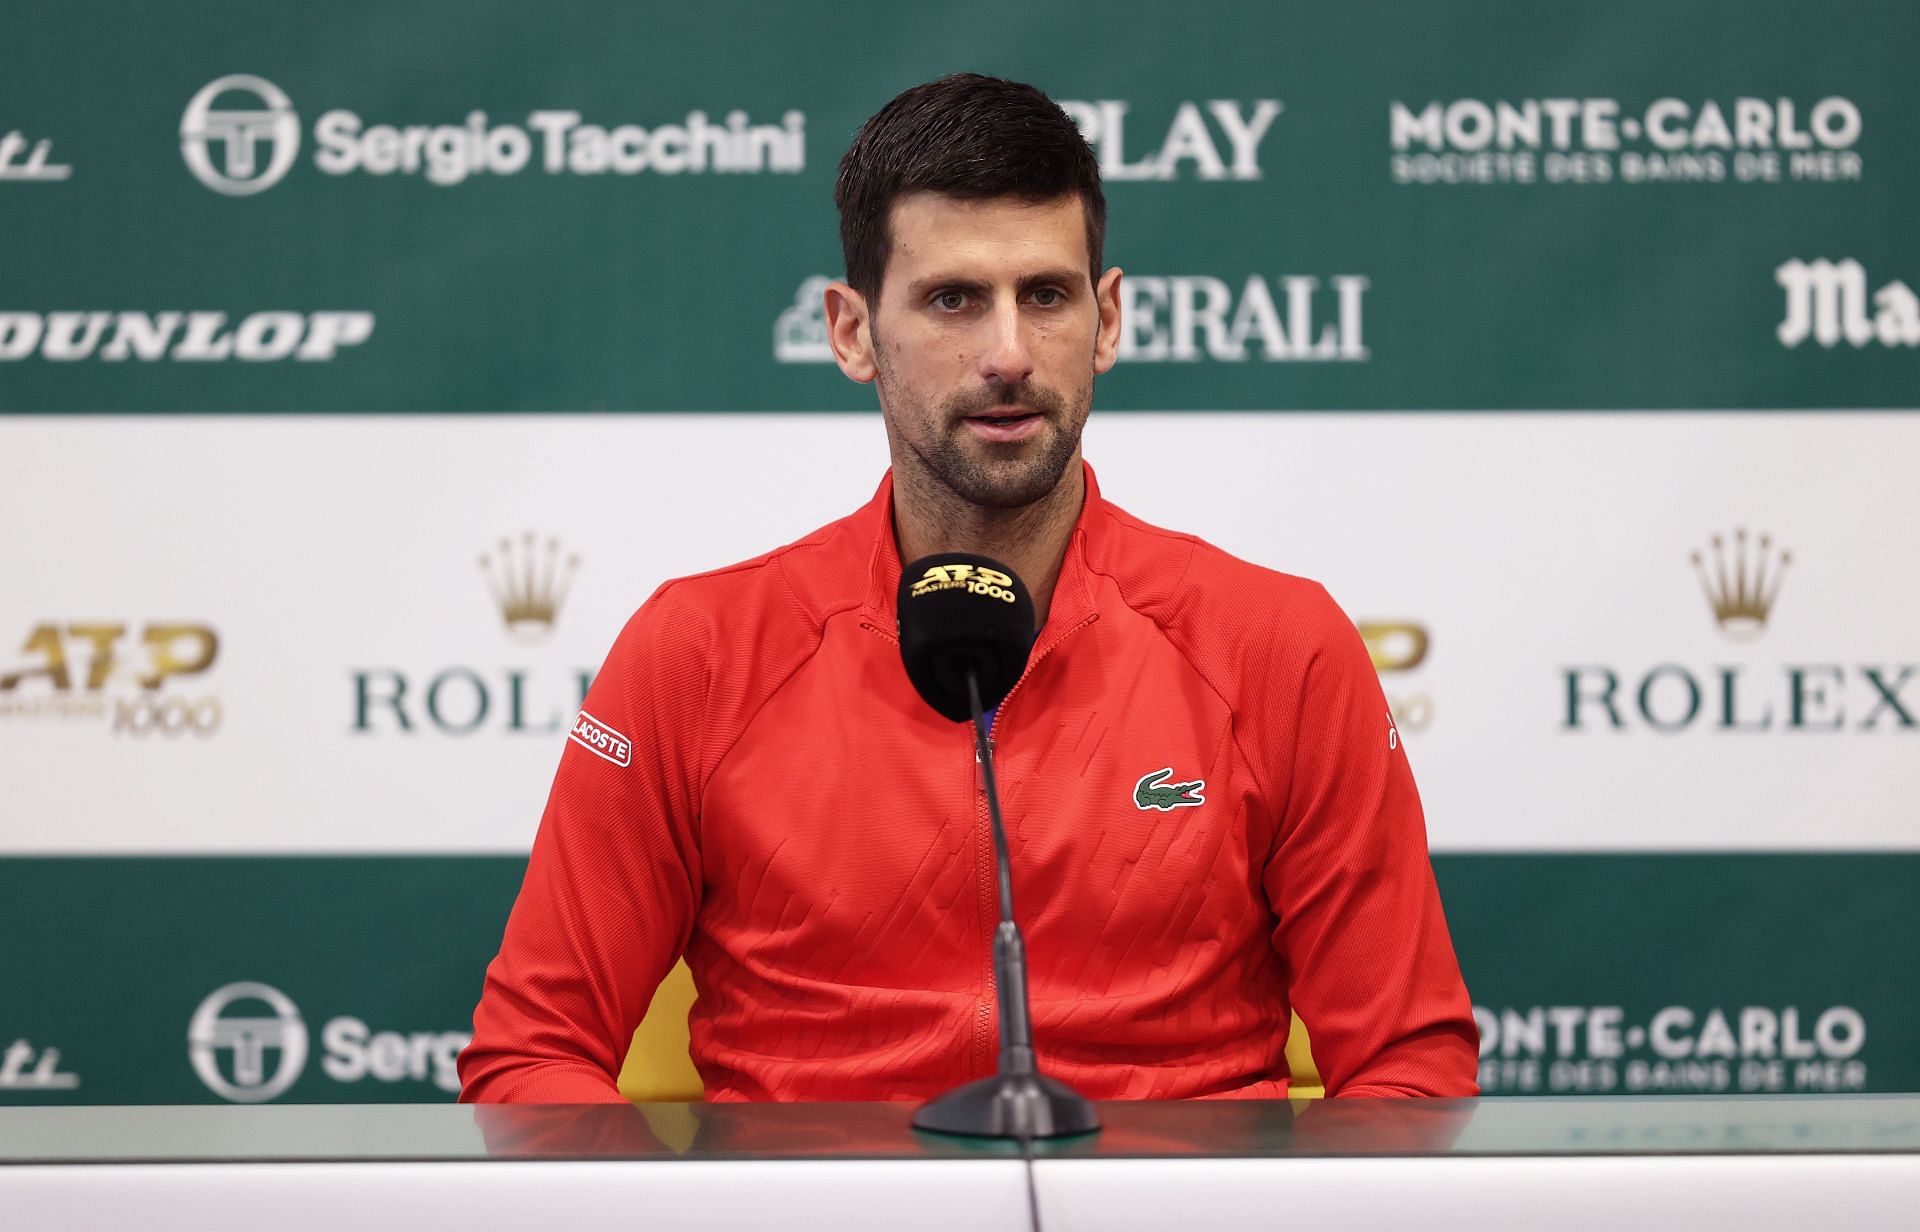 Novak Djokovic needs to get his 2022 campaign up and running.